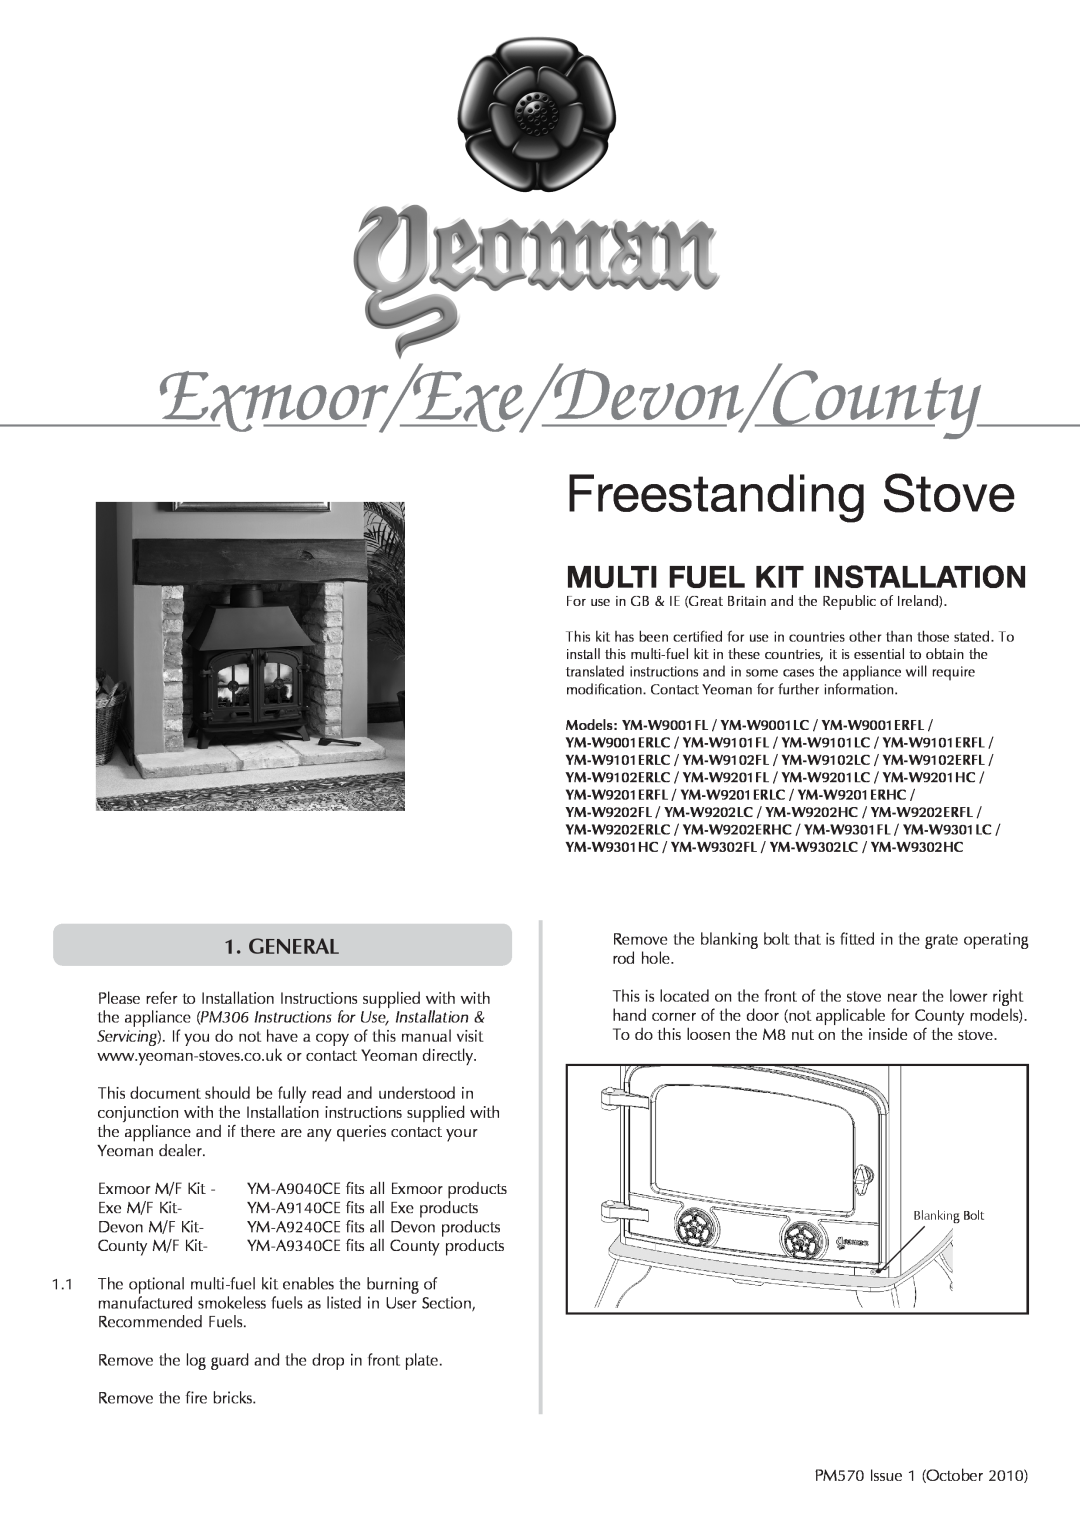 Yeoman YM-A9140CE, YM-A9240CE, YM-A9340CE installation instructions General, Exmoor/Exe/Devon/County, Freestanding Stove 